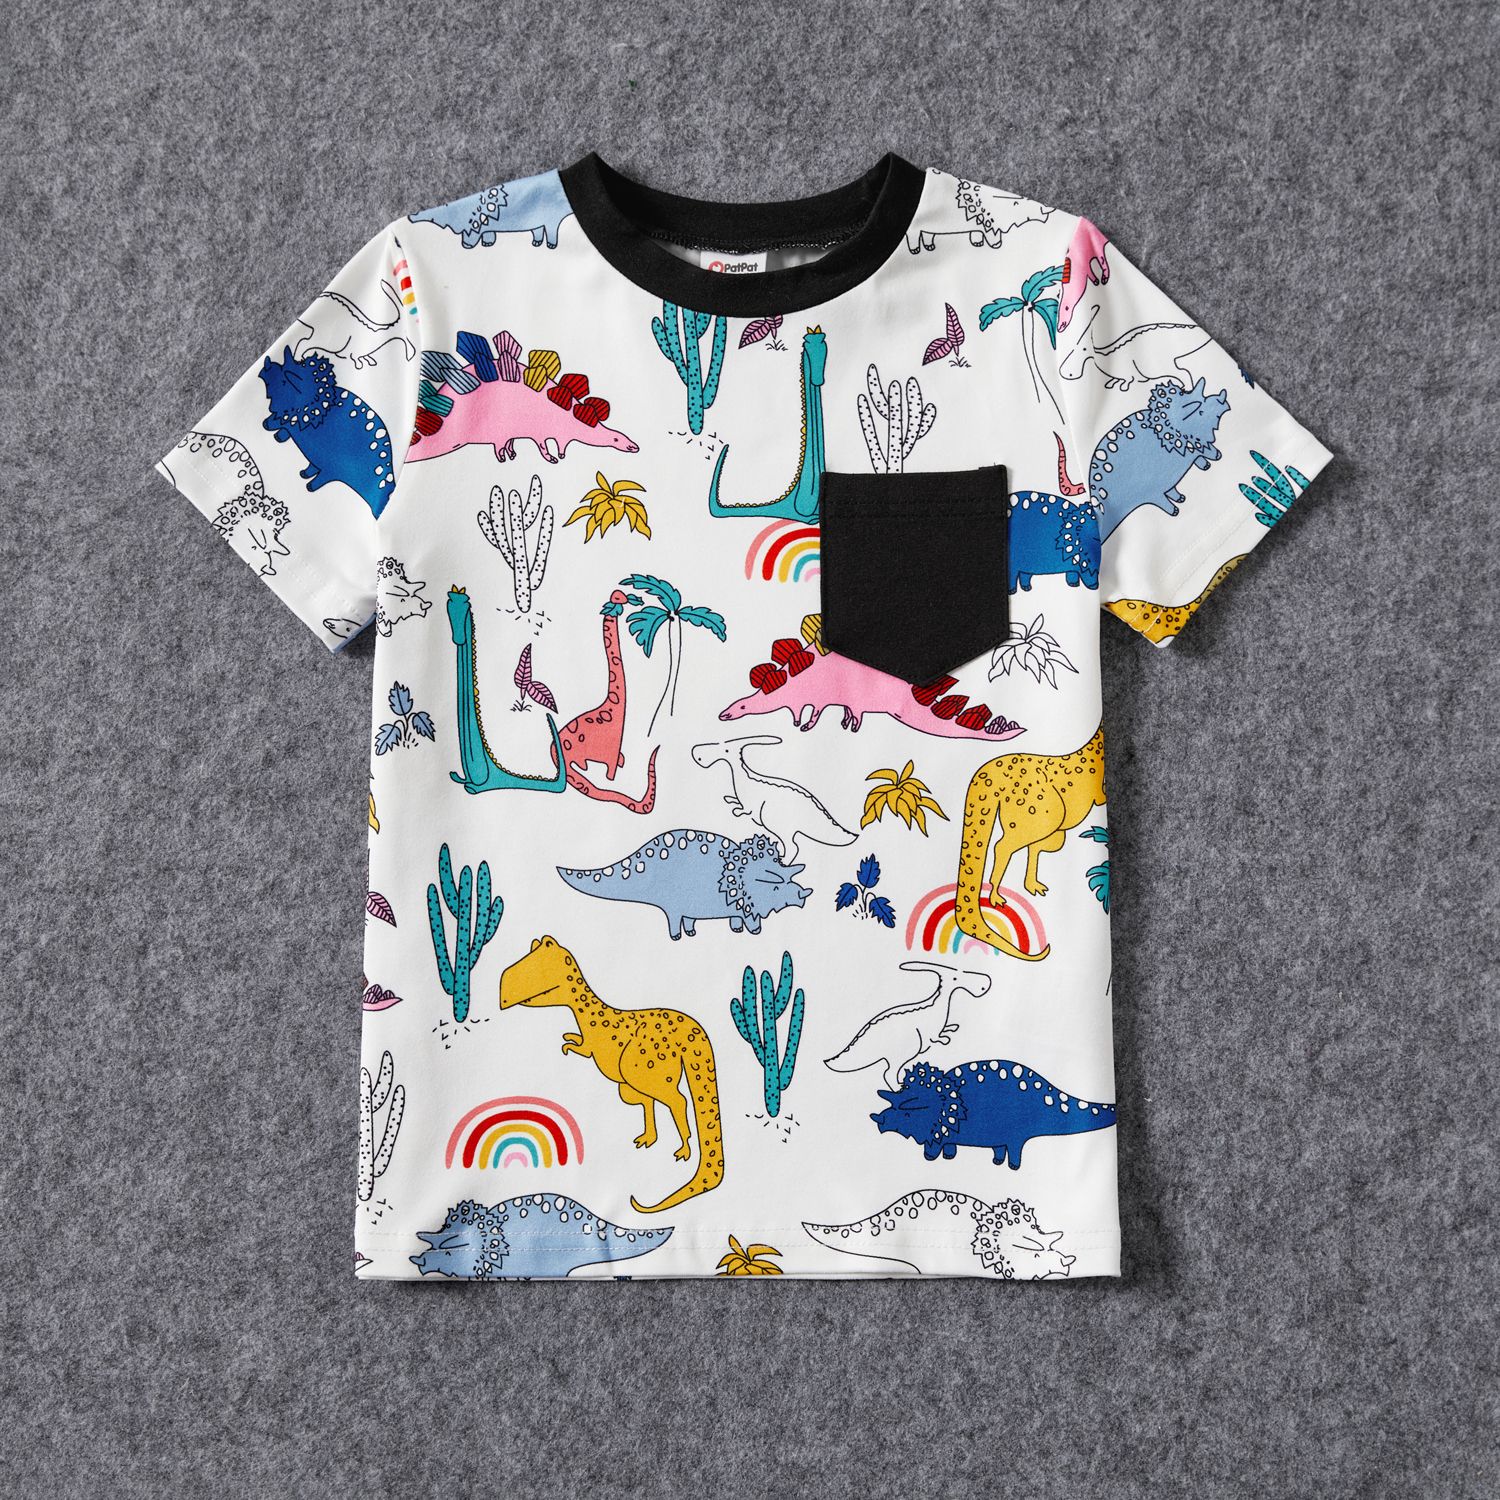 Family Matching Dinosaur Print Drawstring Ruched Side Short-sleeve Dresses And Patch Pocket Short-sleeve T-shirts Sets